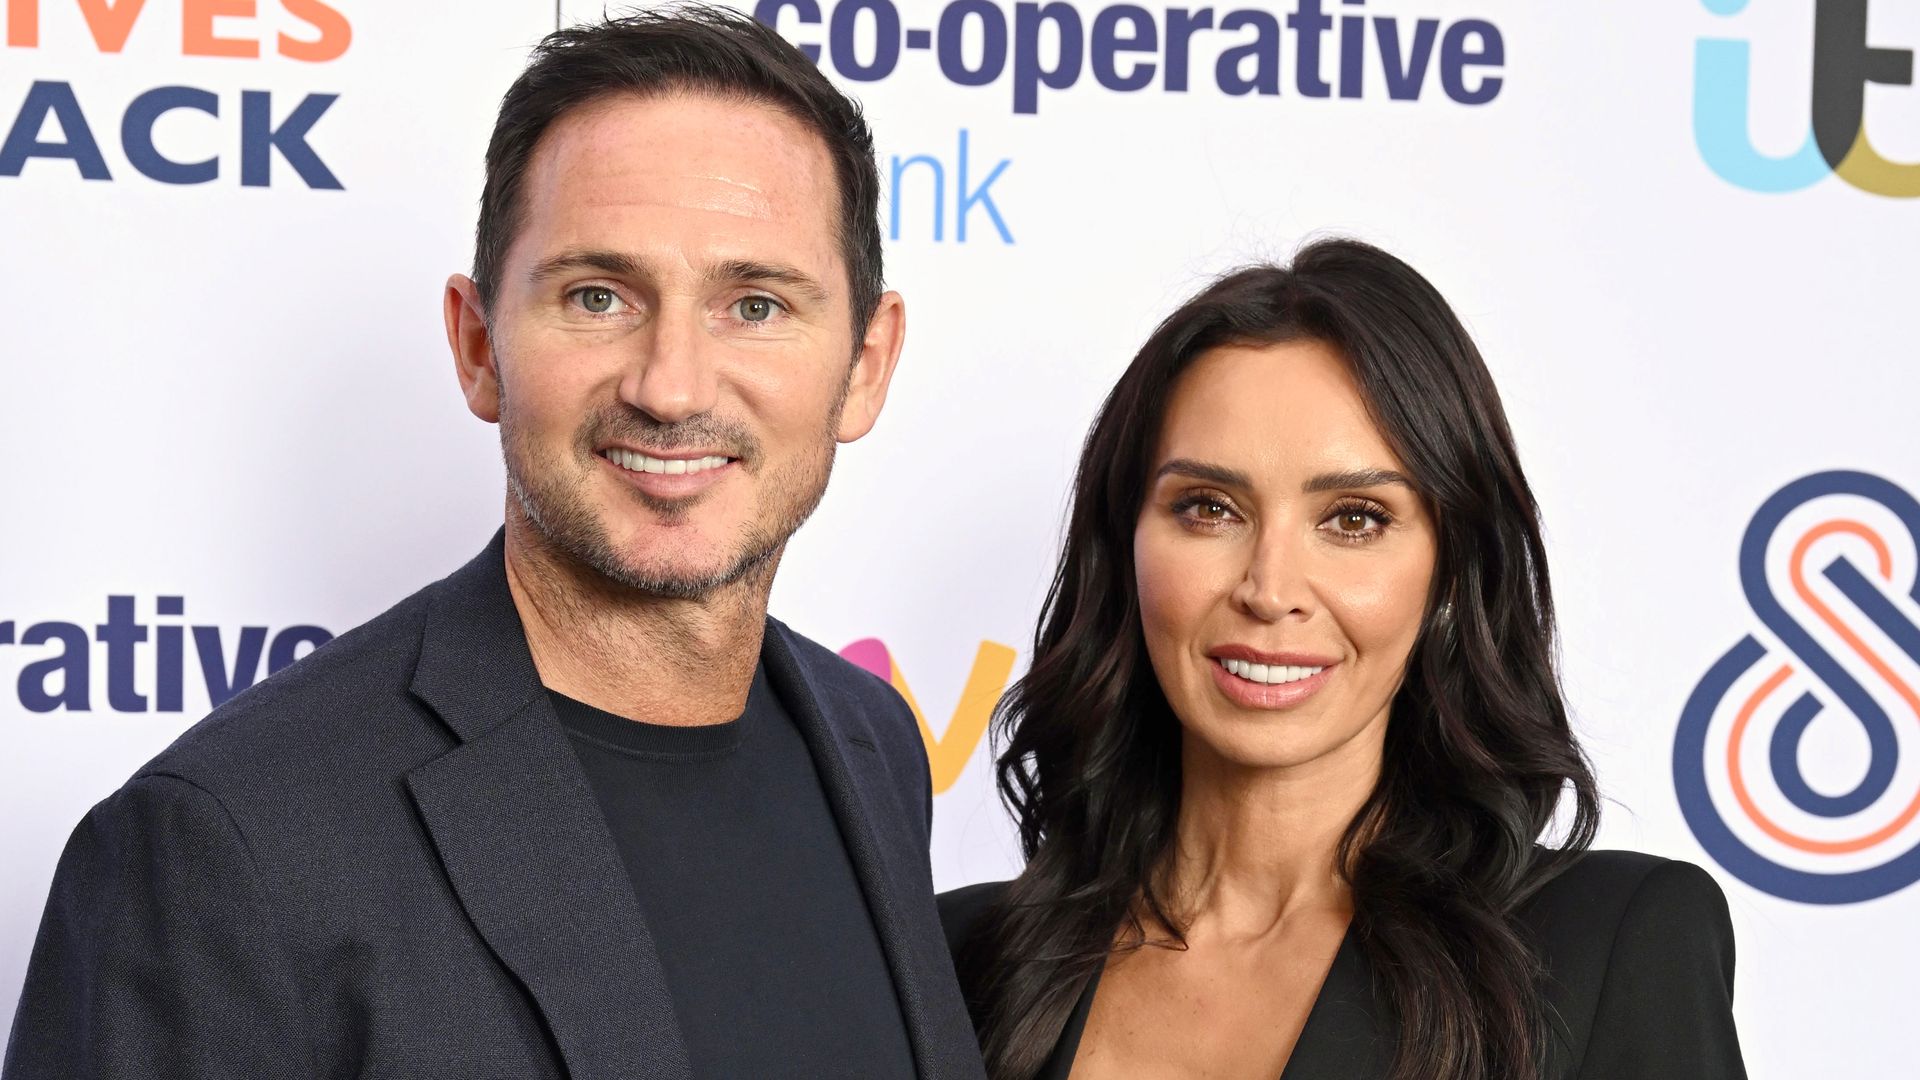 Christine Lampard wows in waist-cinching trousers for date night with husband Frank